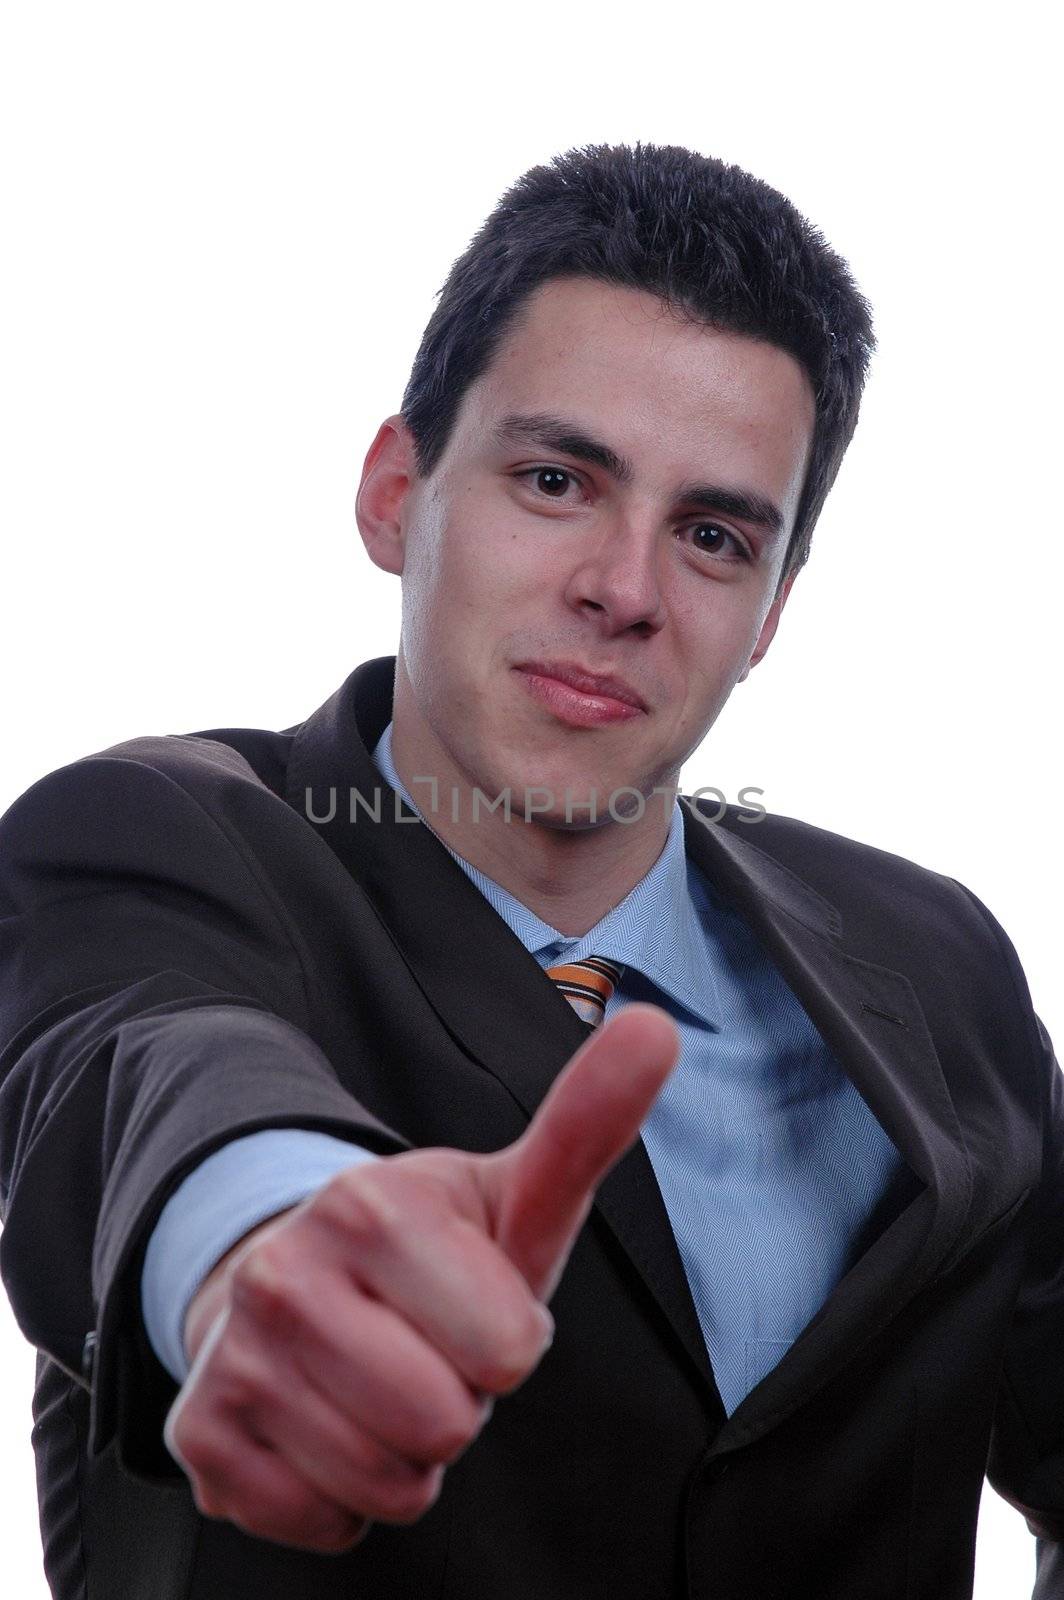 young businessman thumb up isolated over white background by raalves